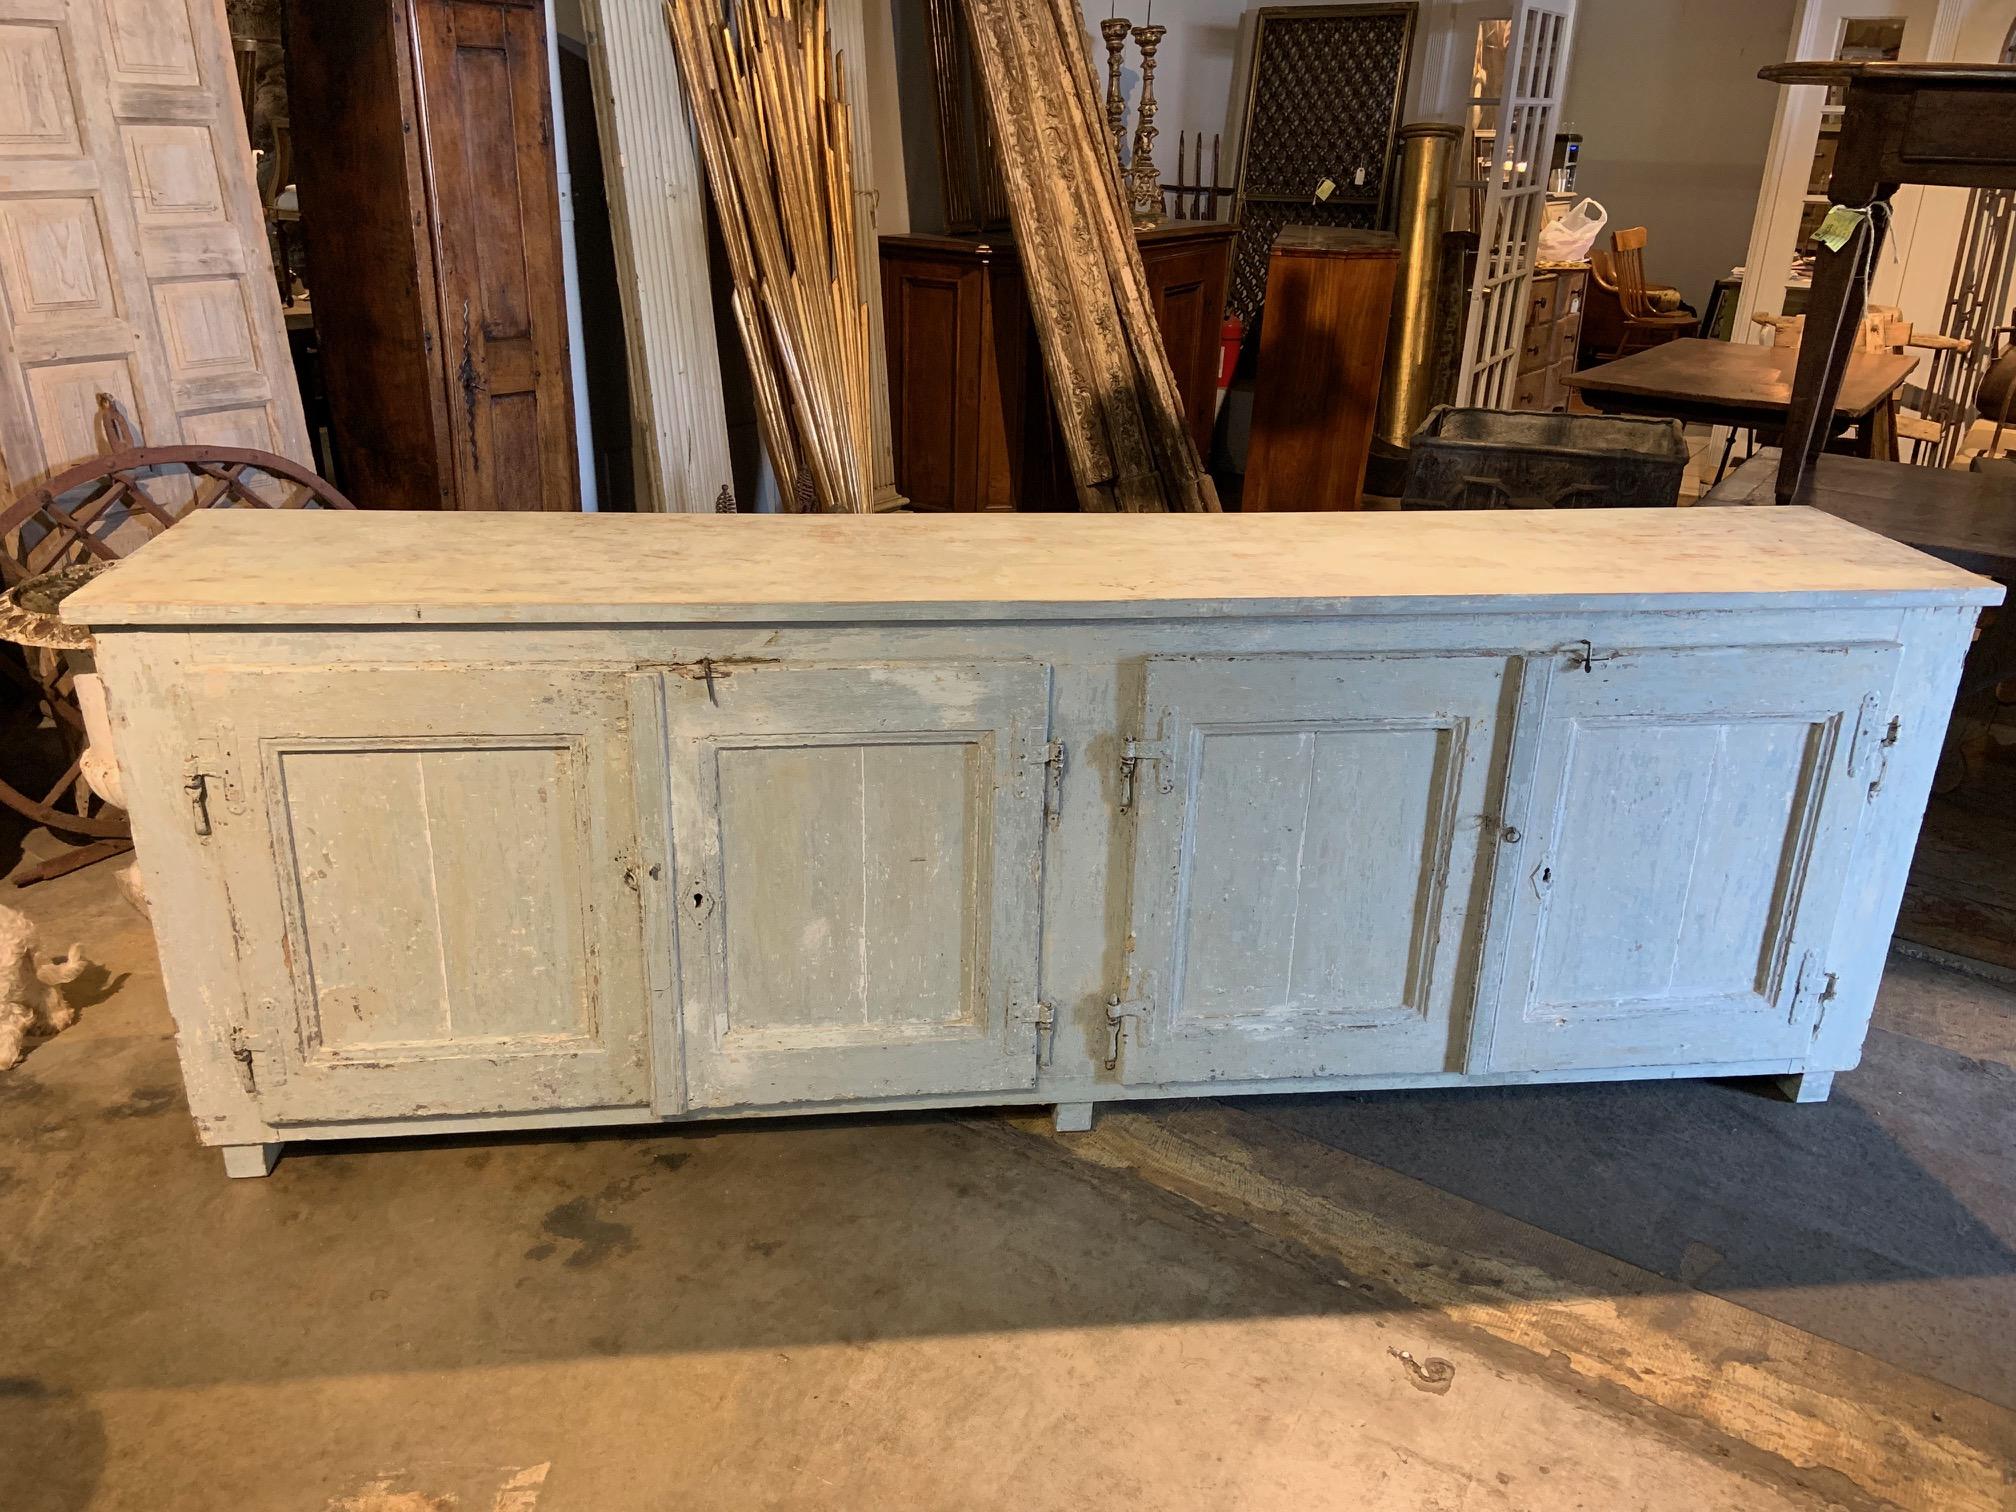 A very handsome Primitive credenza from Northern Italy. Soundly constructed from painted wood. Super patina. A terrific storage piece for any casual living area.